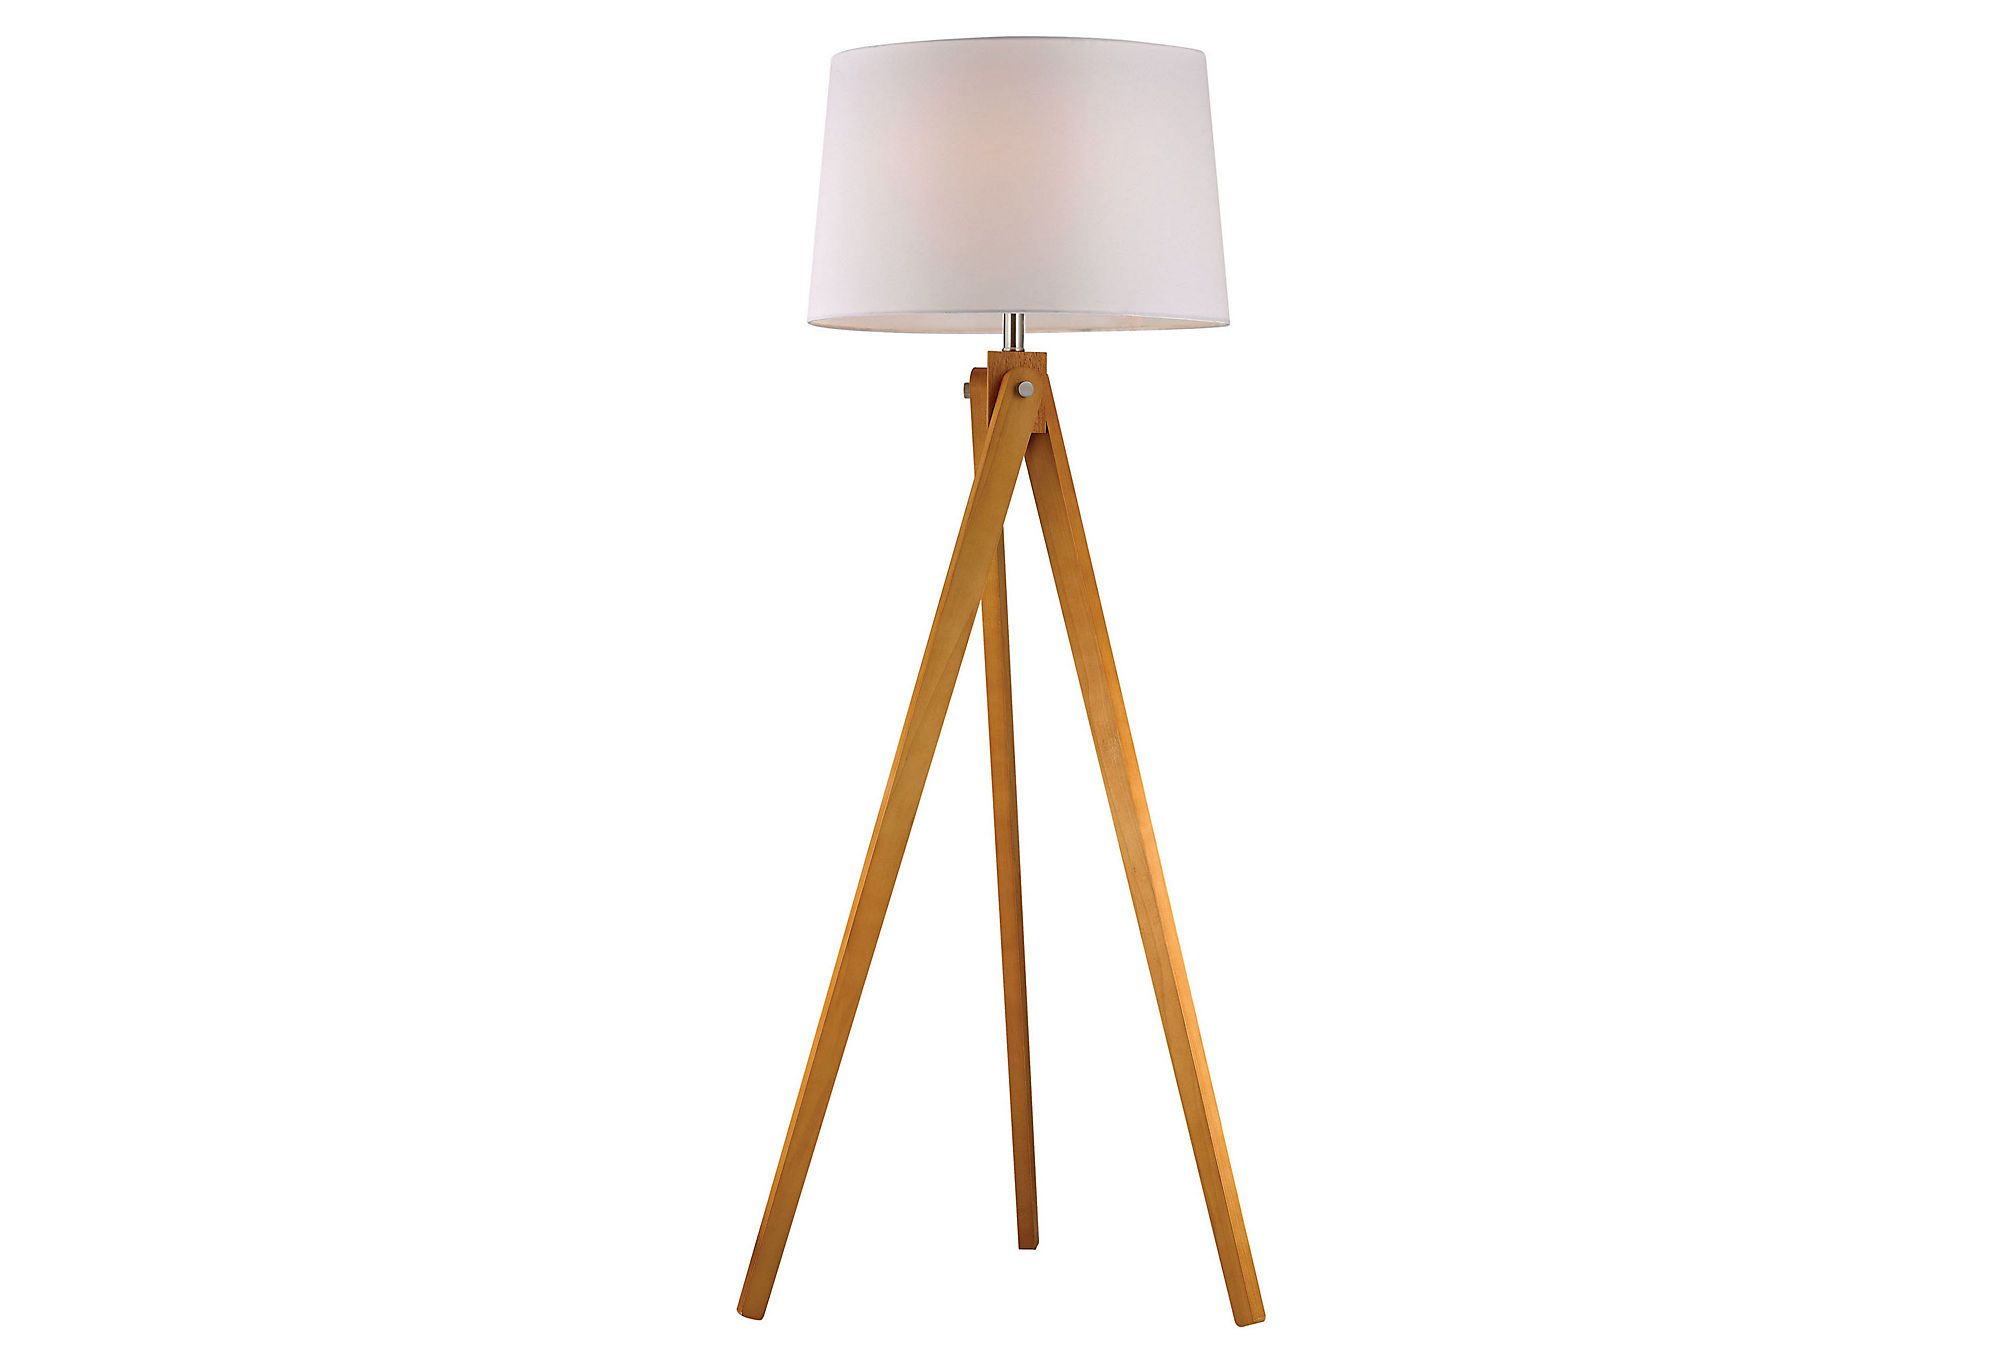 Tripod Floor Lamp Natural One Kings Lane Living Room intended for size 2000 X 1362